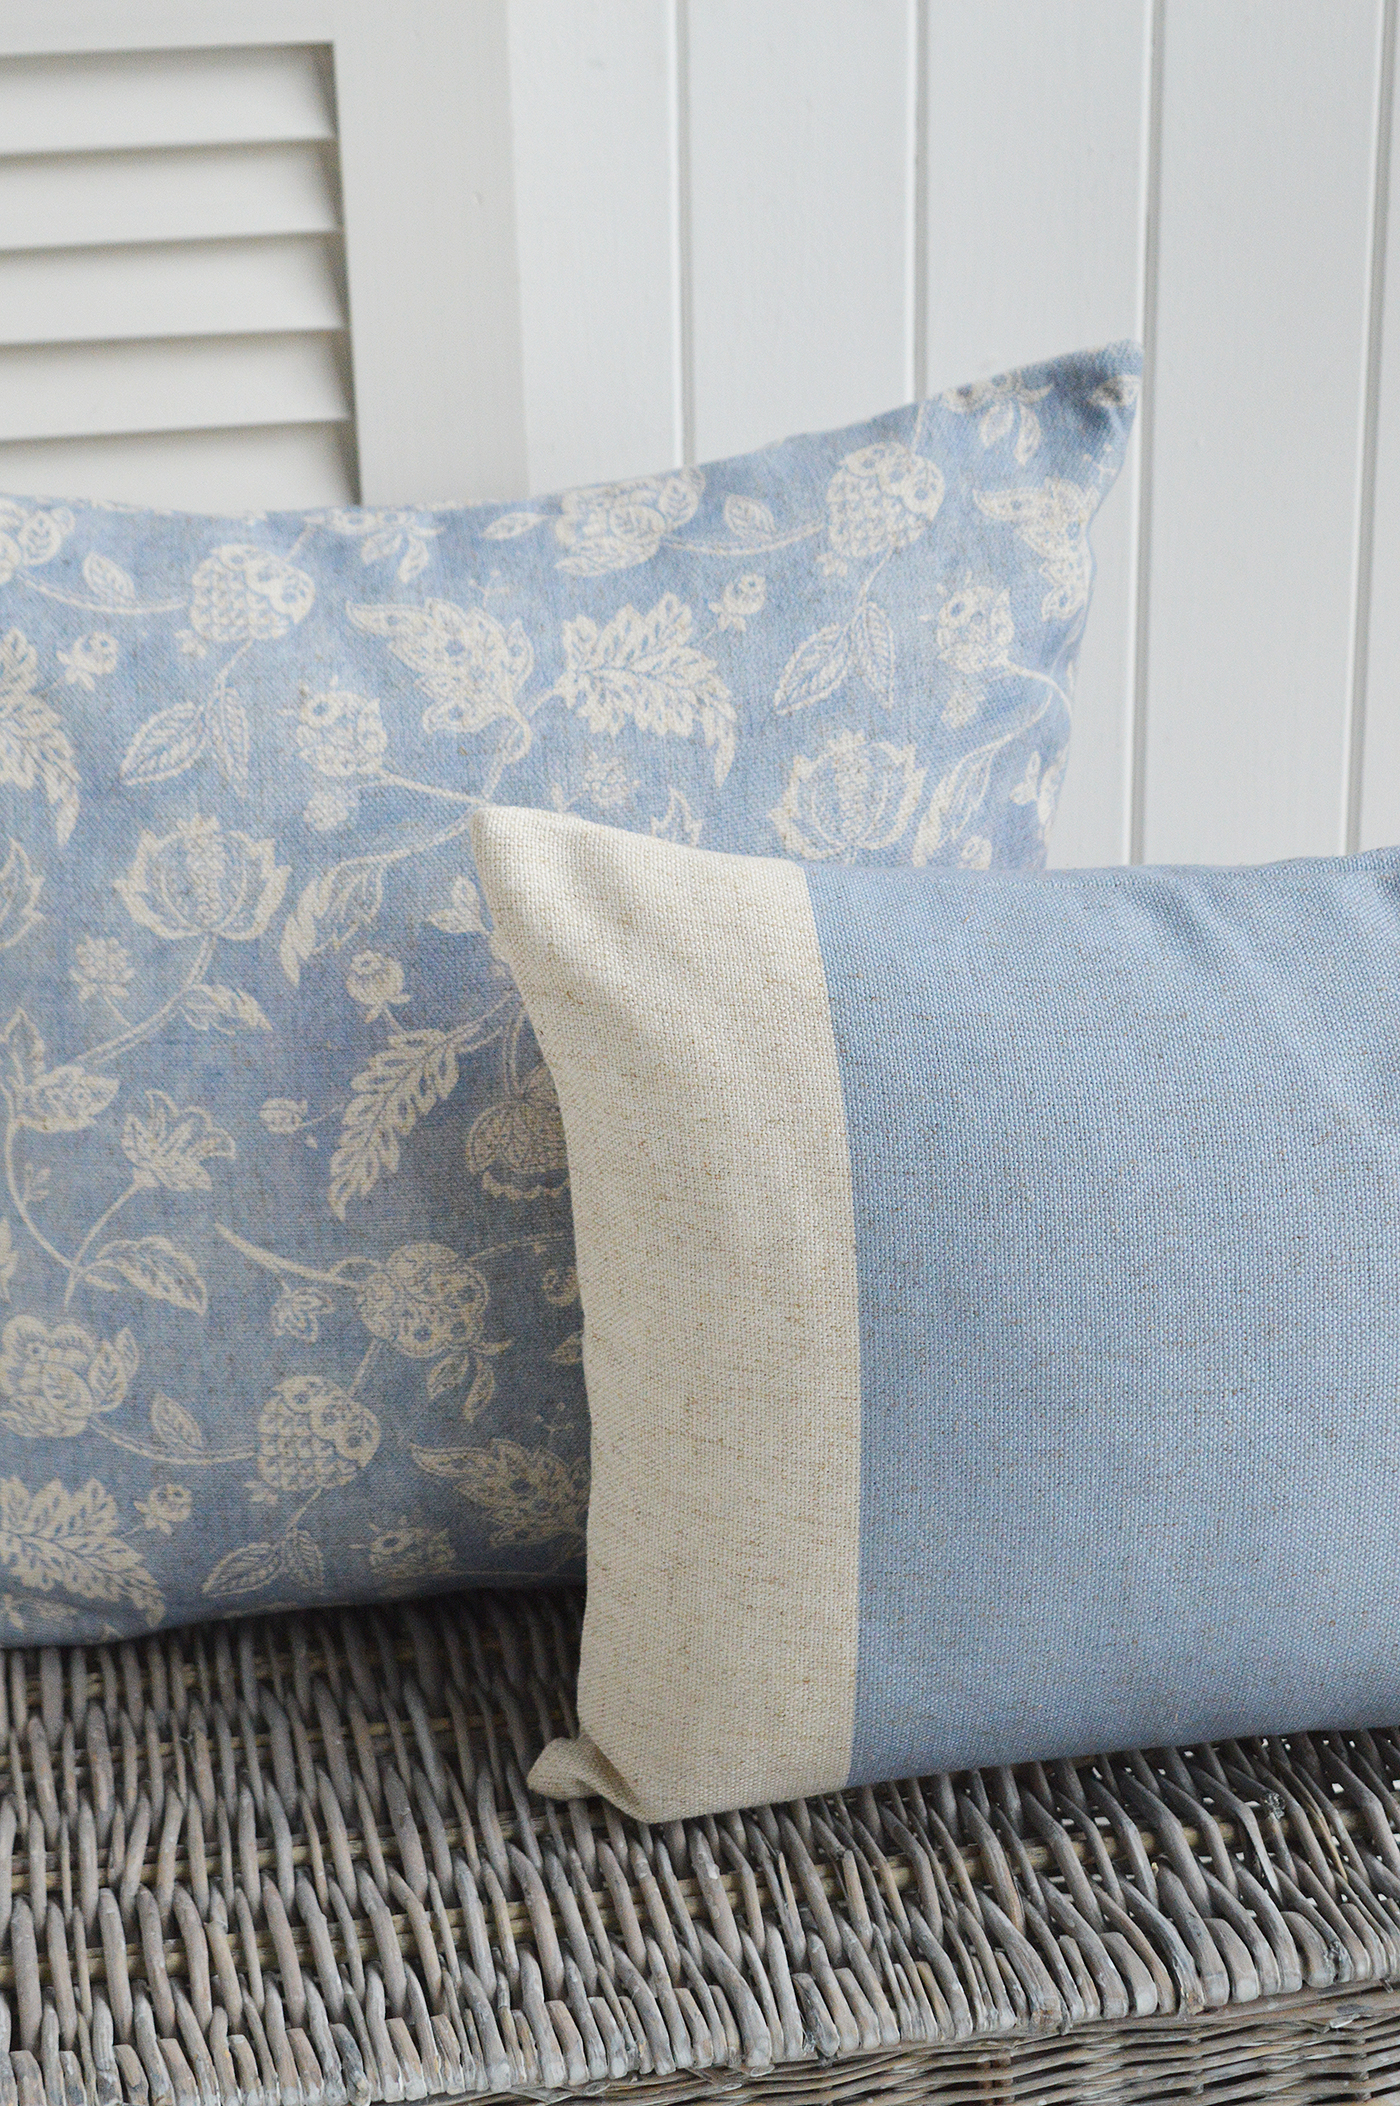 Meredith New England vintage style cushions for modern country farmhouse and coastal furniture and interiors